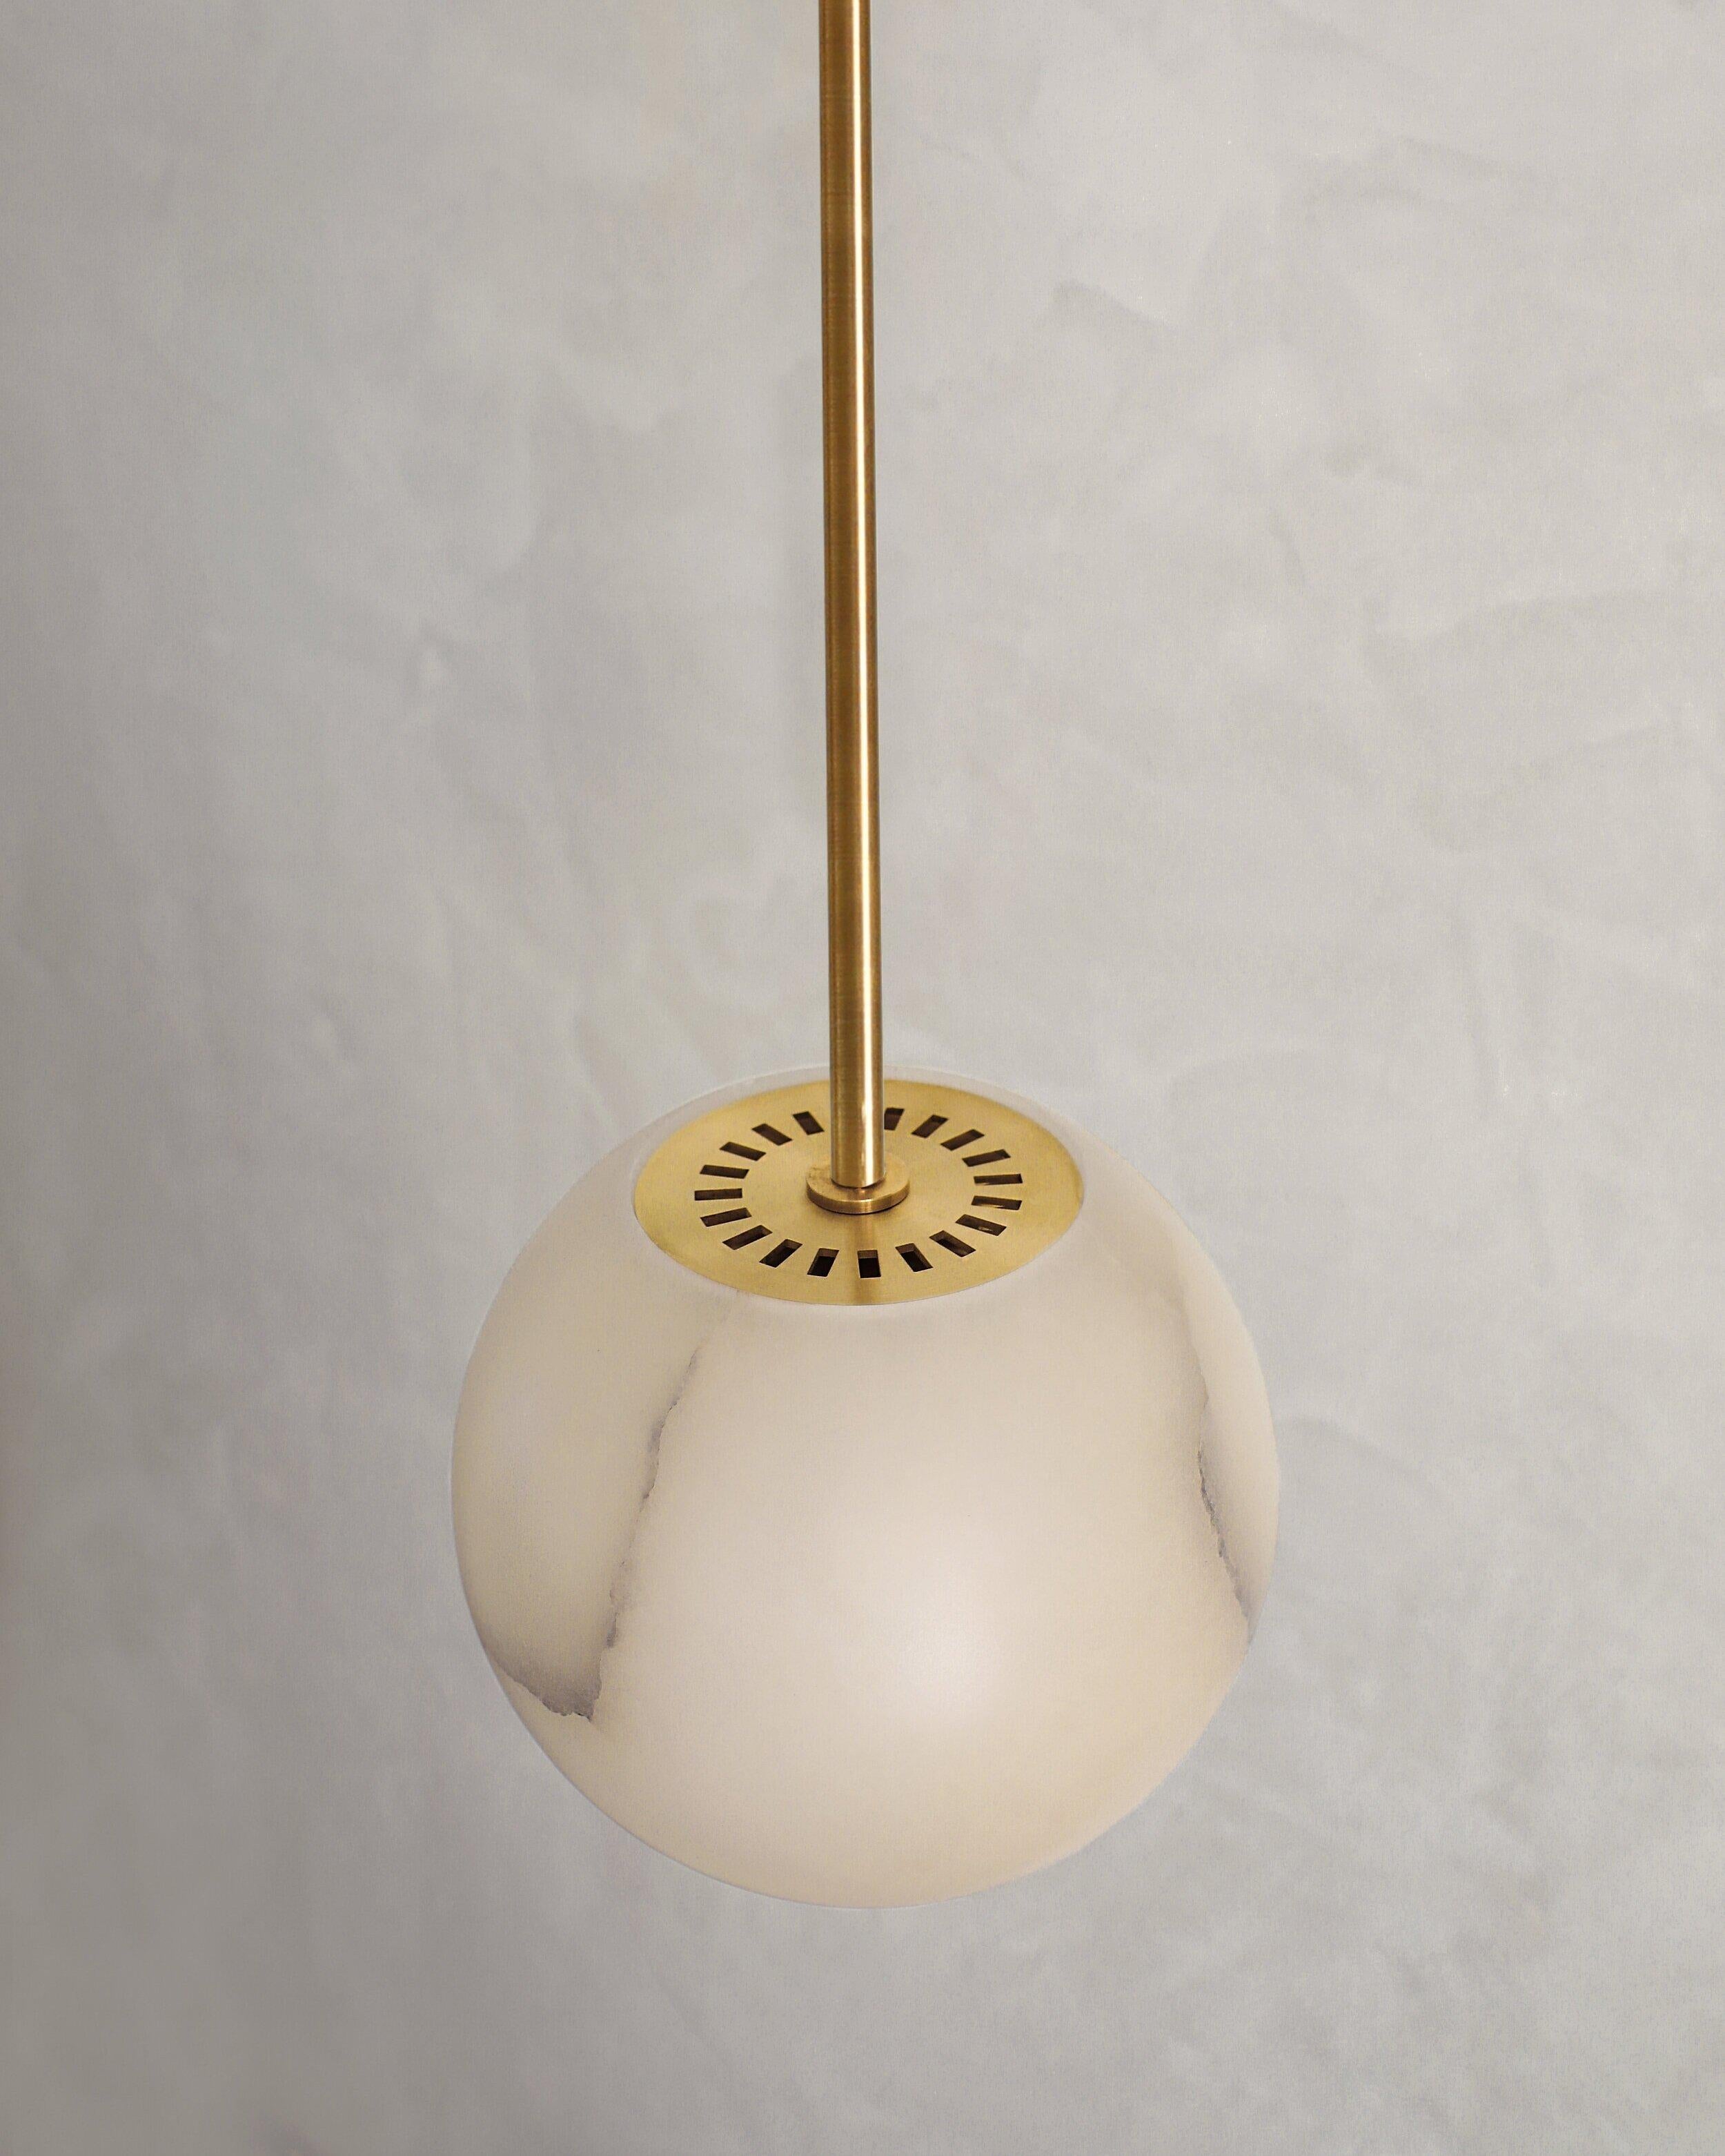 Planette tube 22 pendant by Contain
Dimensions: Ø 22 x H 100 cm (custom lenght).
Materials: Alabaster, brass.

Also available in different finishes and dimensions (Ø10 cm / Ø16,5 cm / Ø18 cm / Ø22 cm x custom length). Please contact us.

All